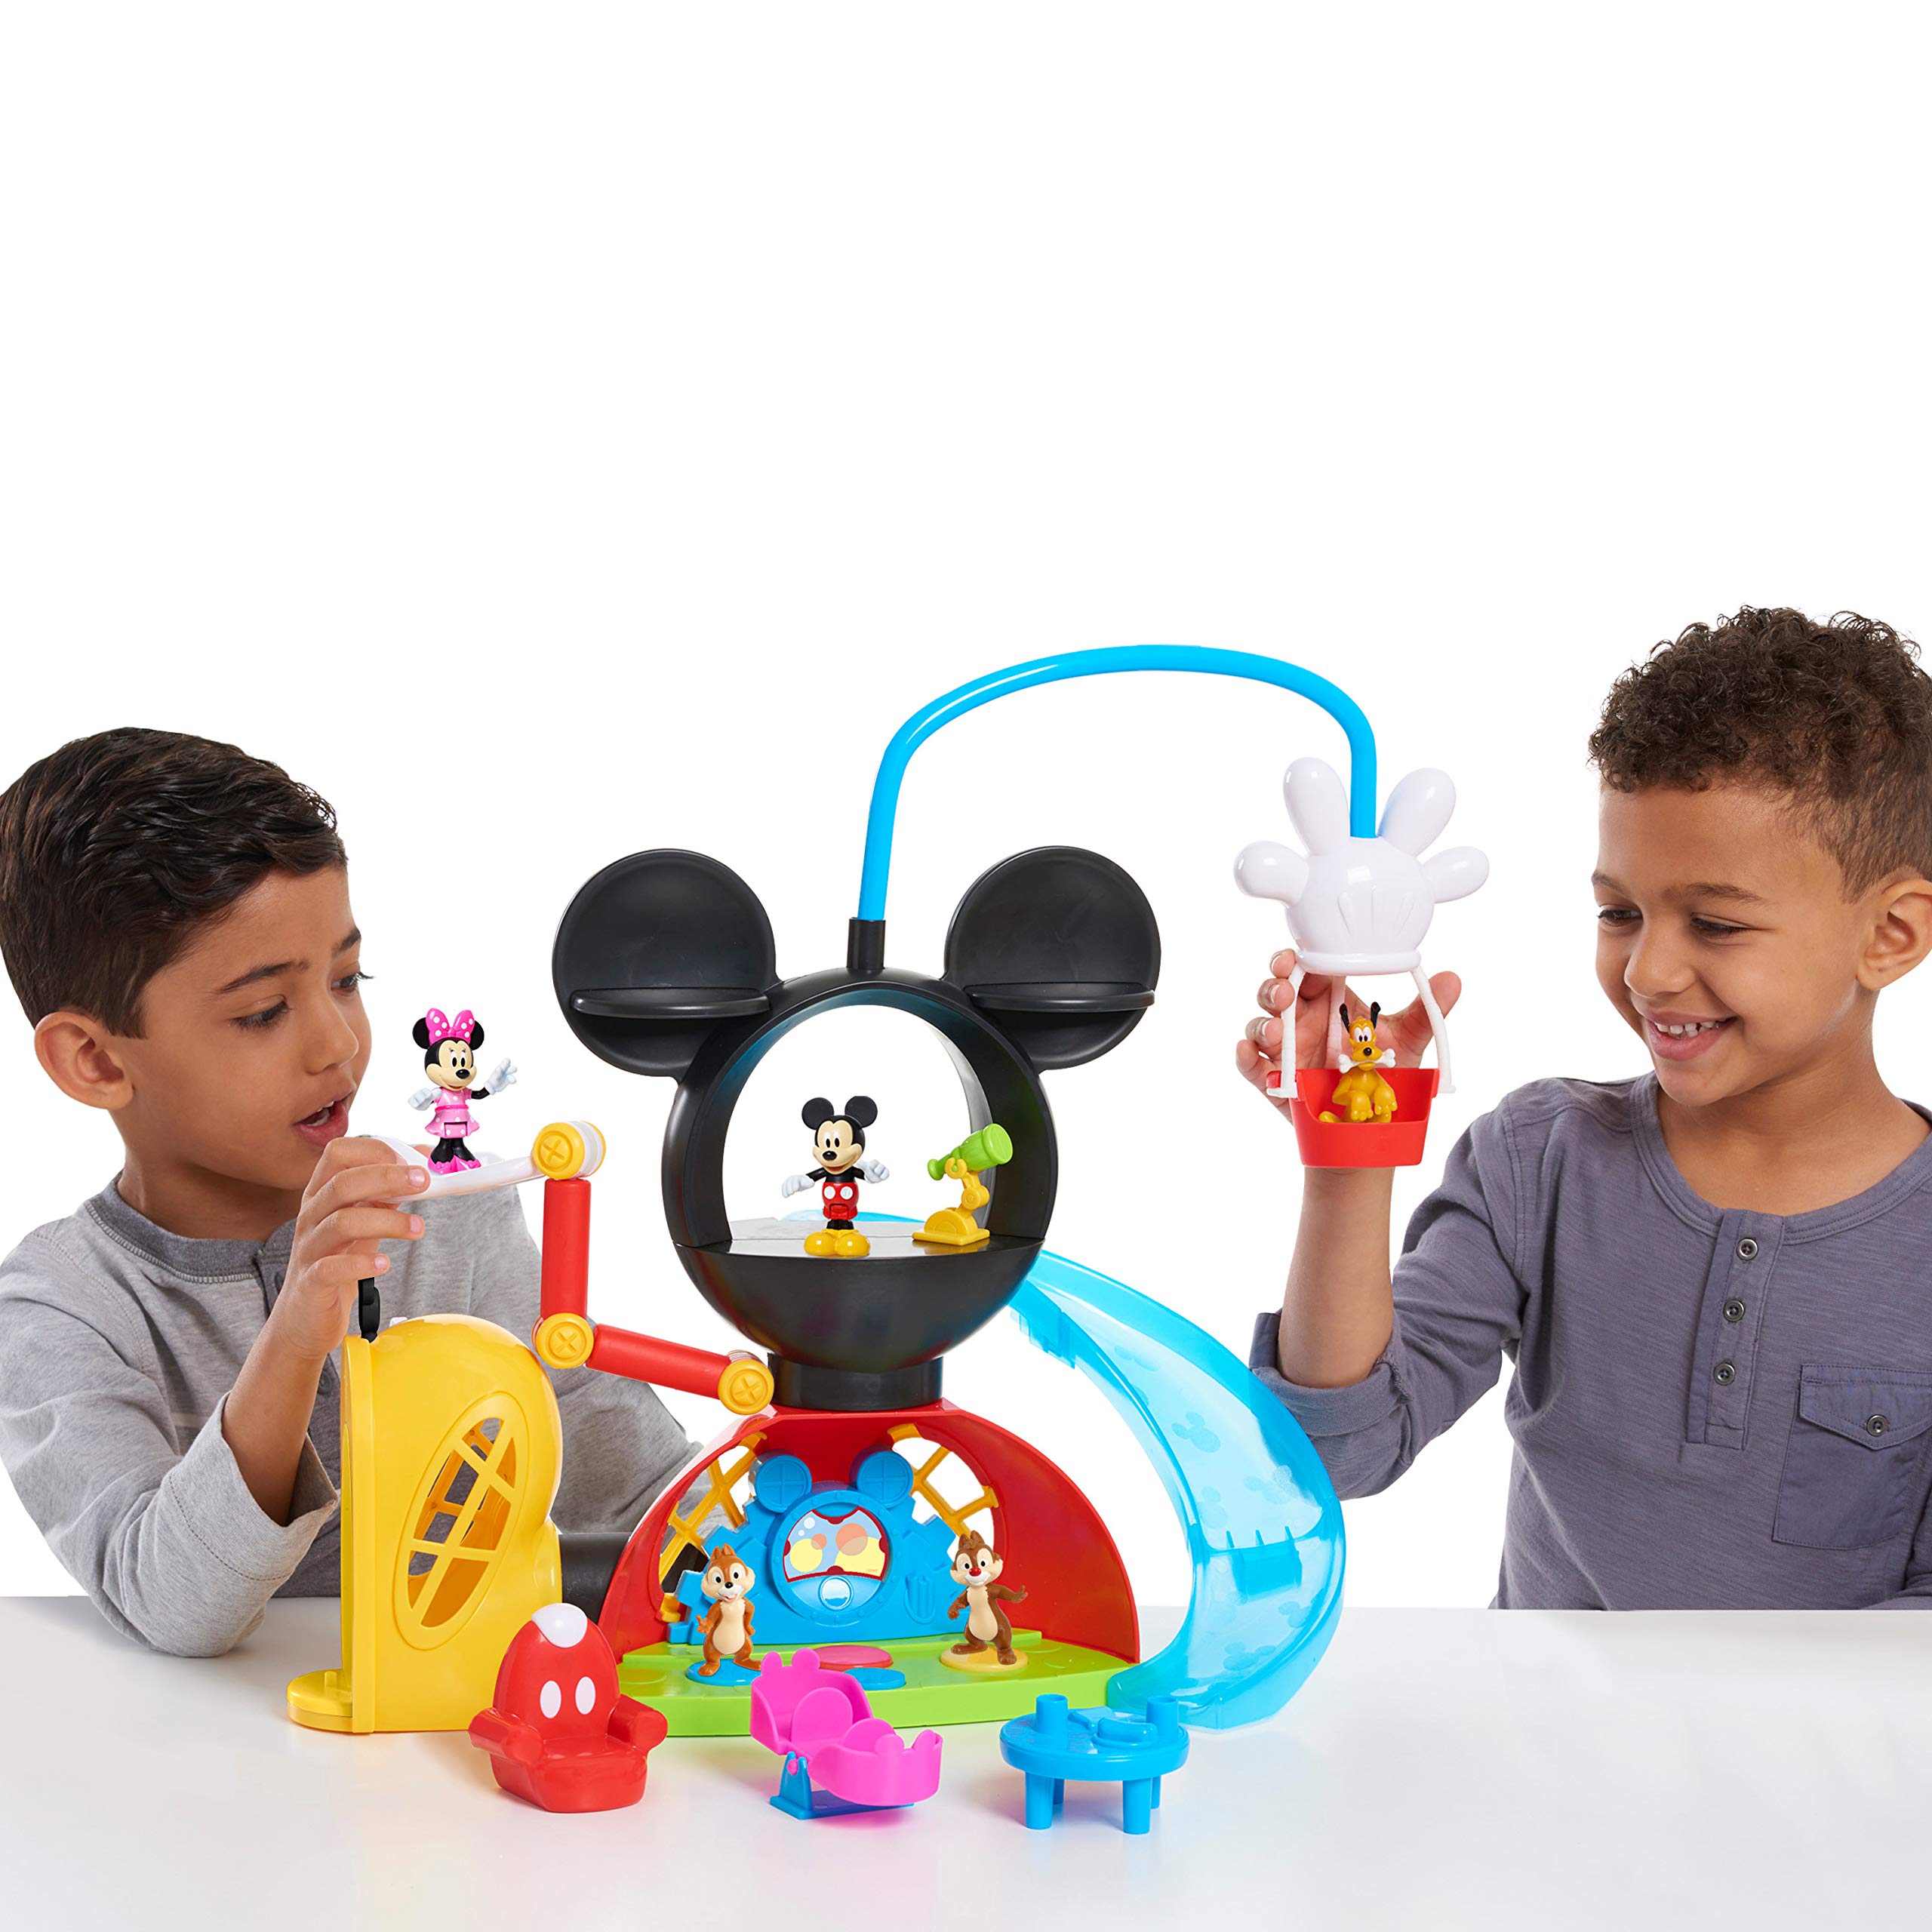 Mickey Mouse Clubhouse Adventures Playset with Bonus Figures, Officially Licensed Kids Toys for Ages 3 Up, Gifts and Presents by Just Play